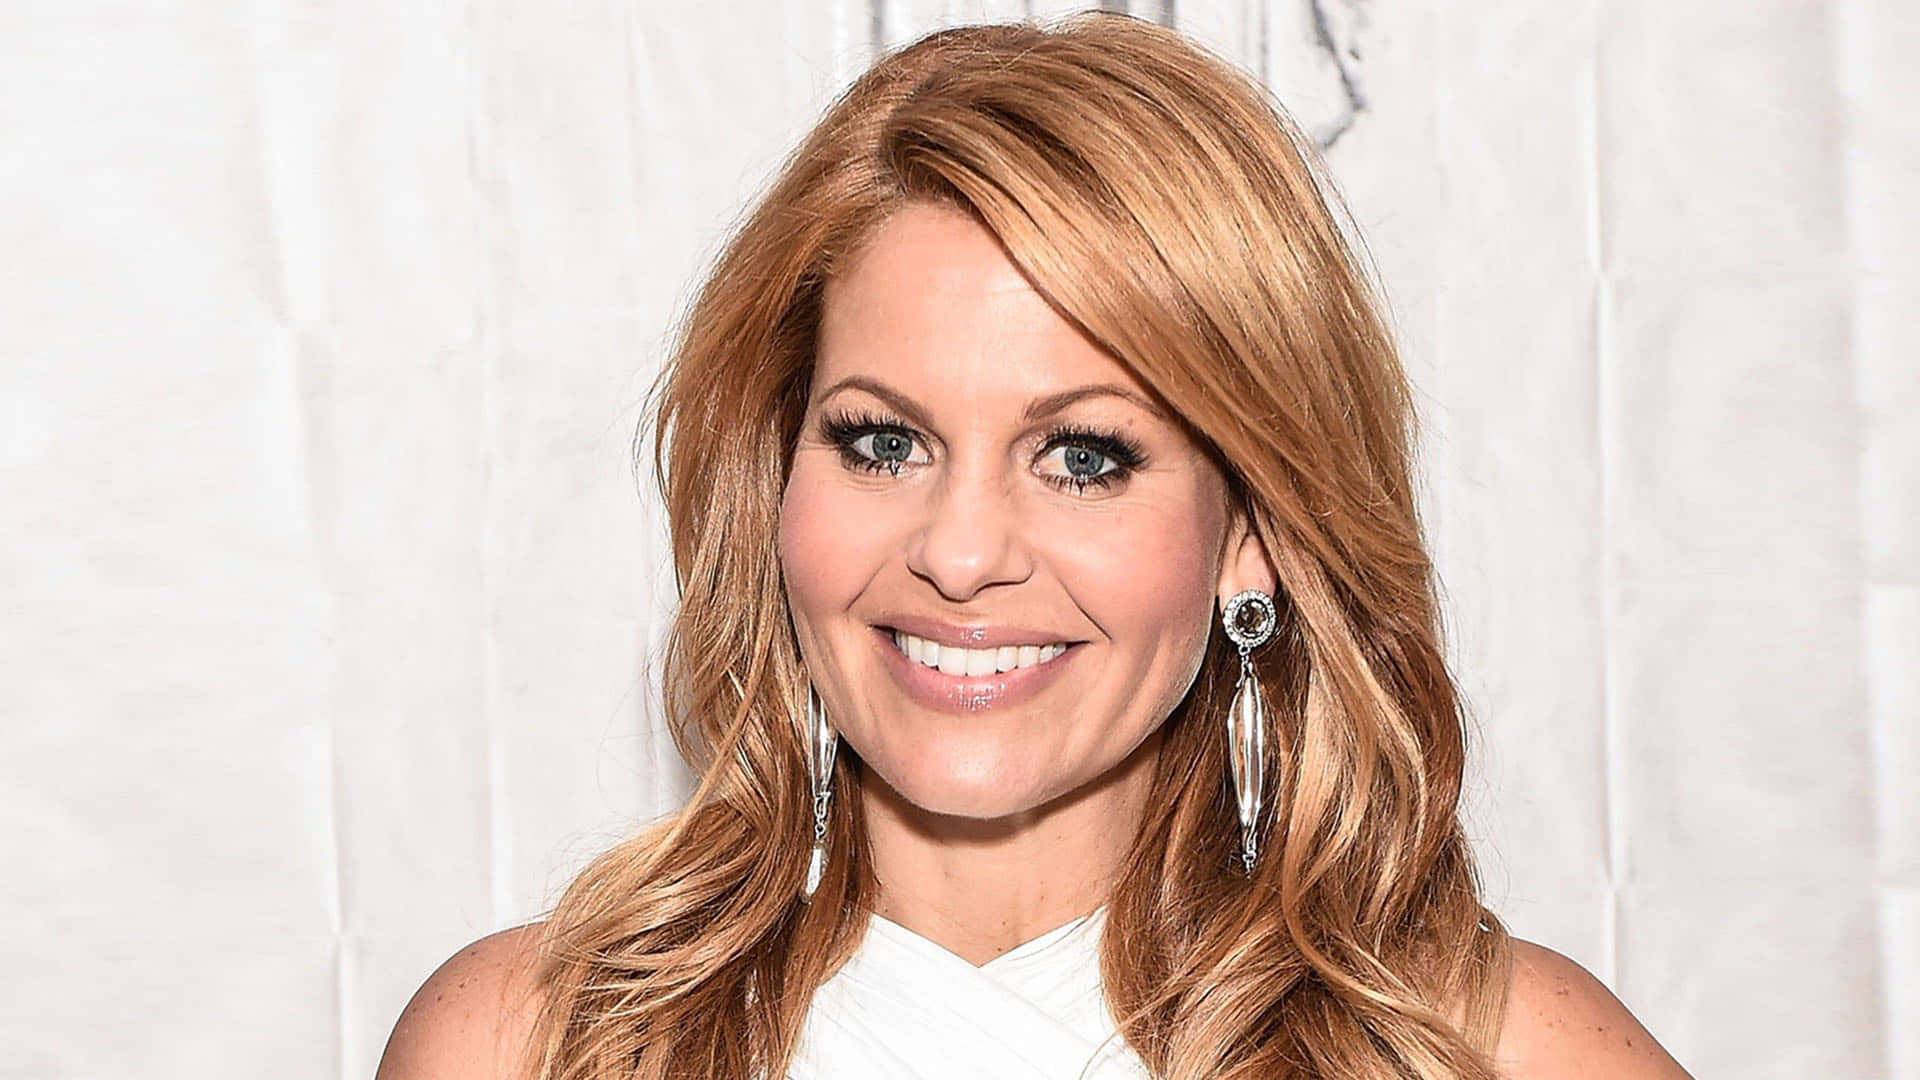 Candace Cameron Bure Smiling Radiantly at an Event Wallpaper